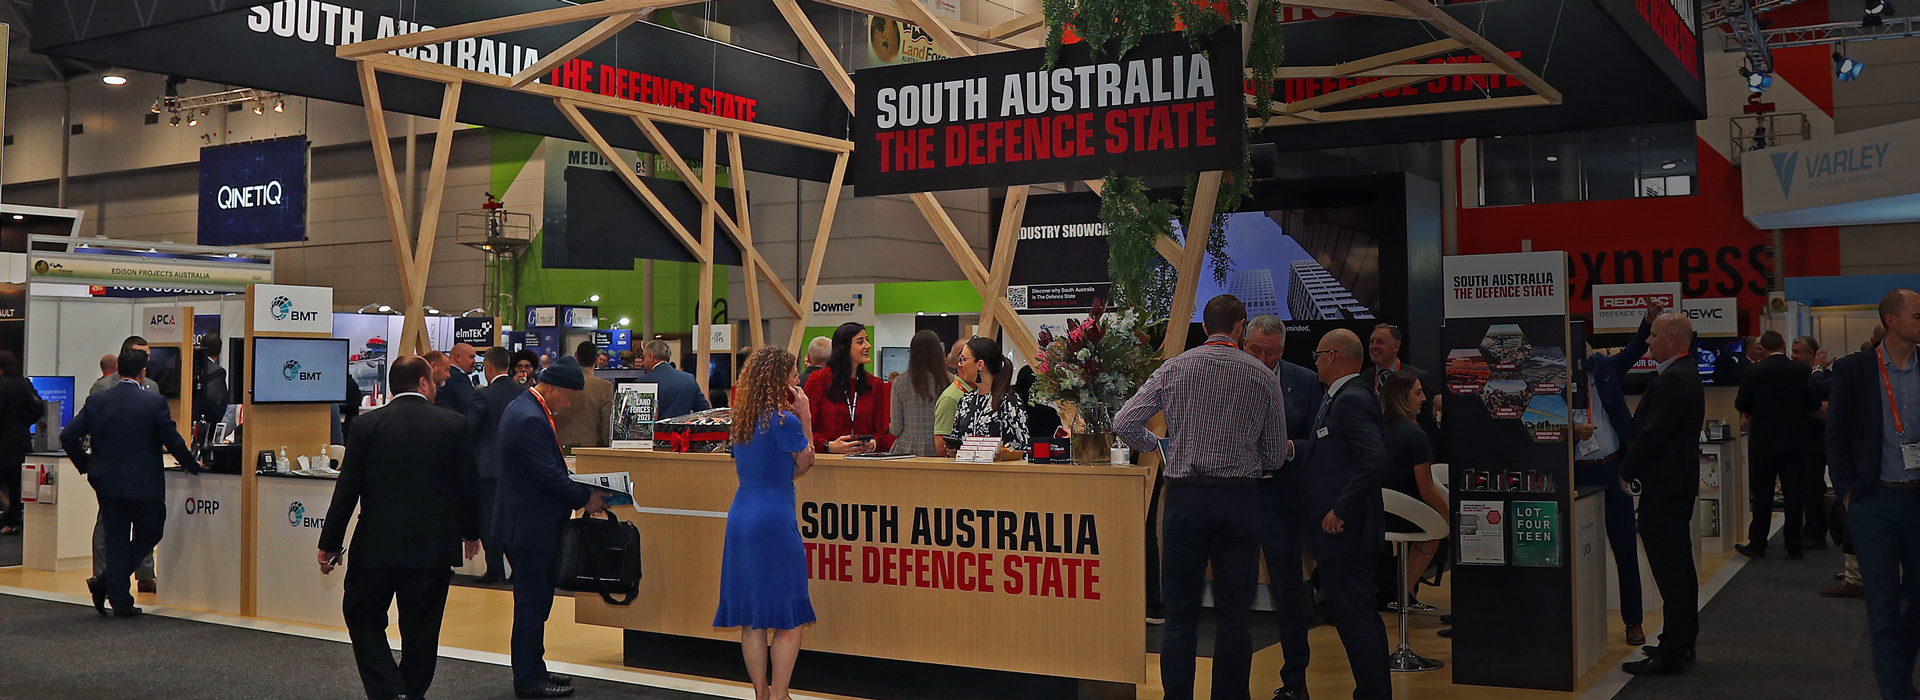 South Australia - The Defence State Exhibition Stand